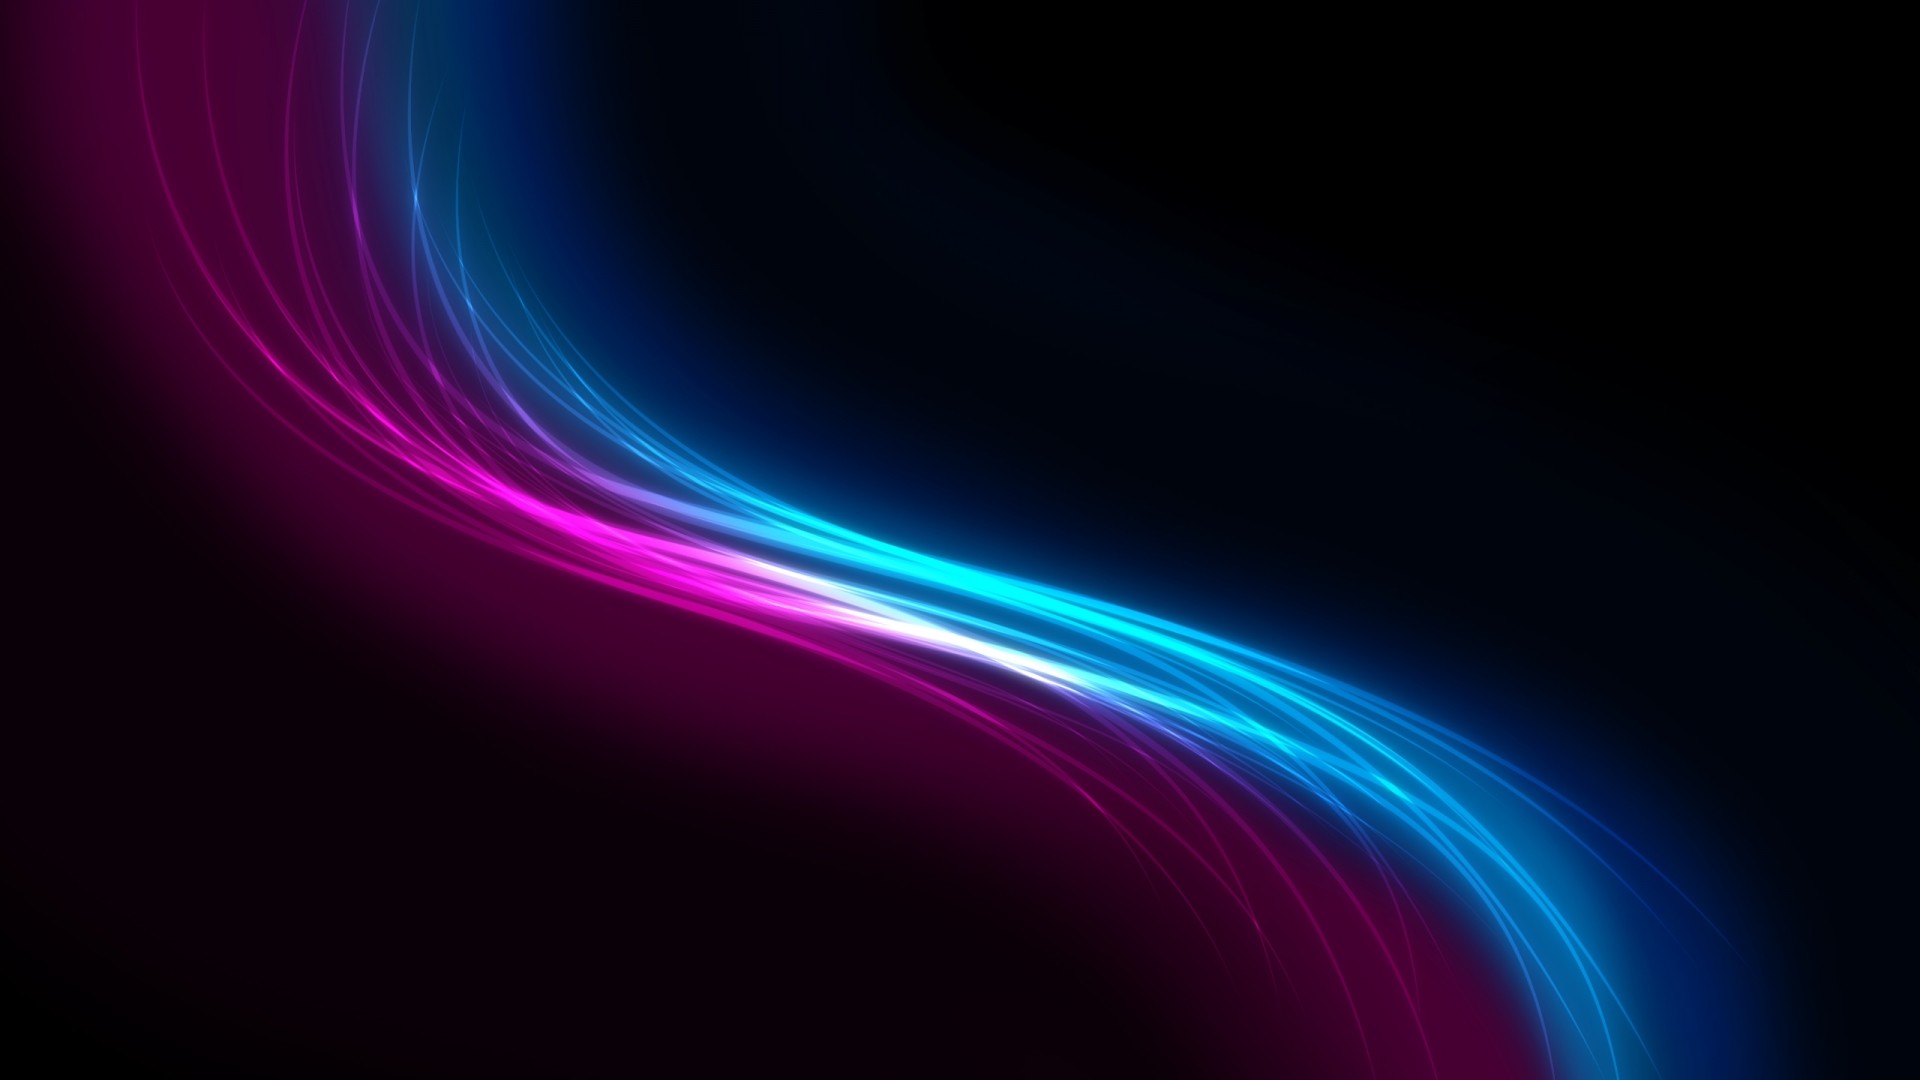 1920x1080 ... Collection of Black Backgrounds Wallpapers on Spyder Wallpapers